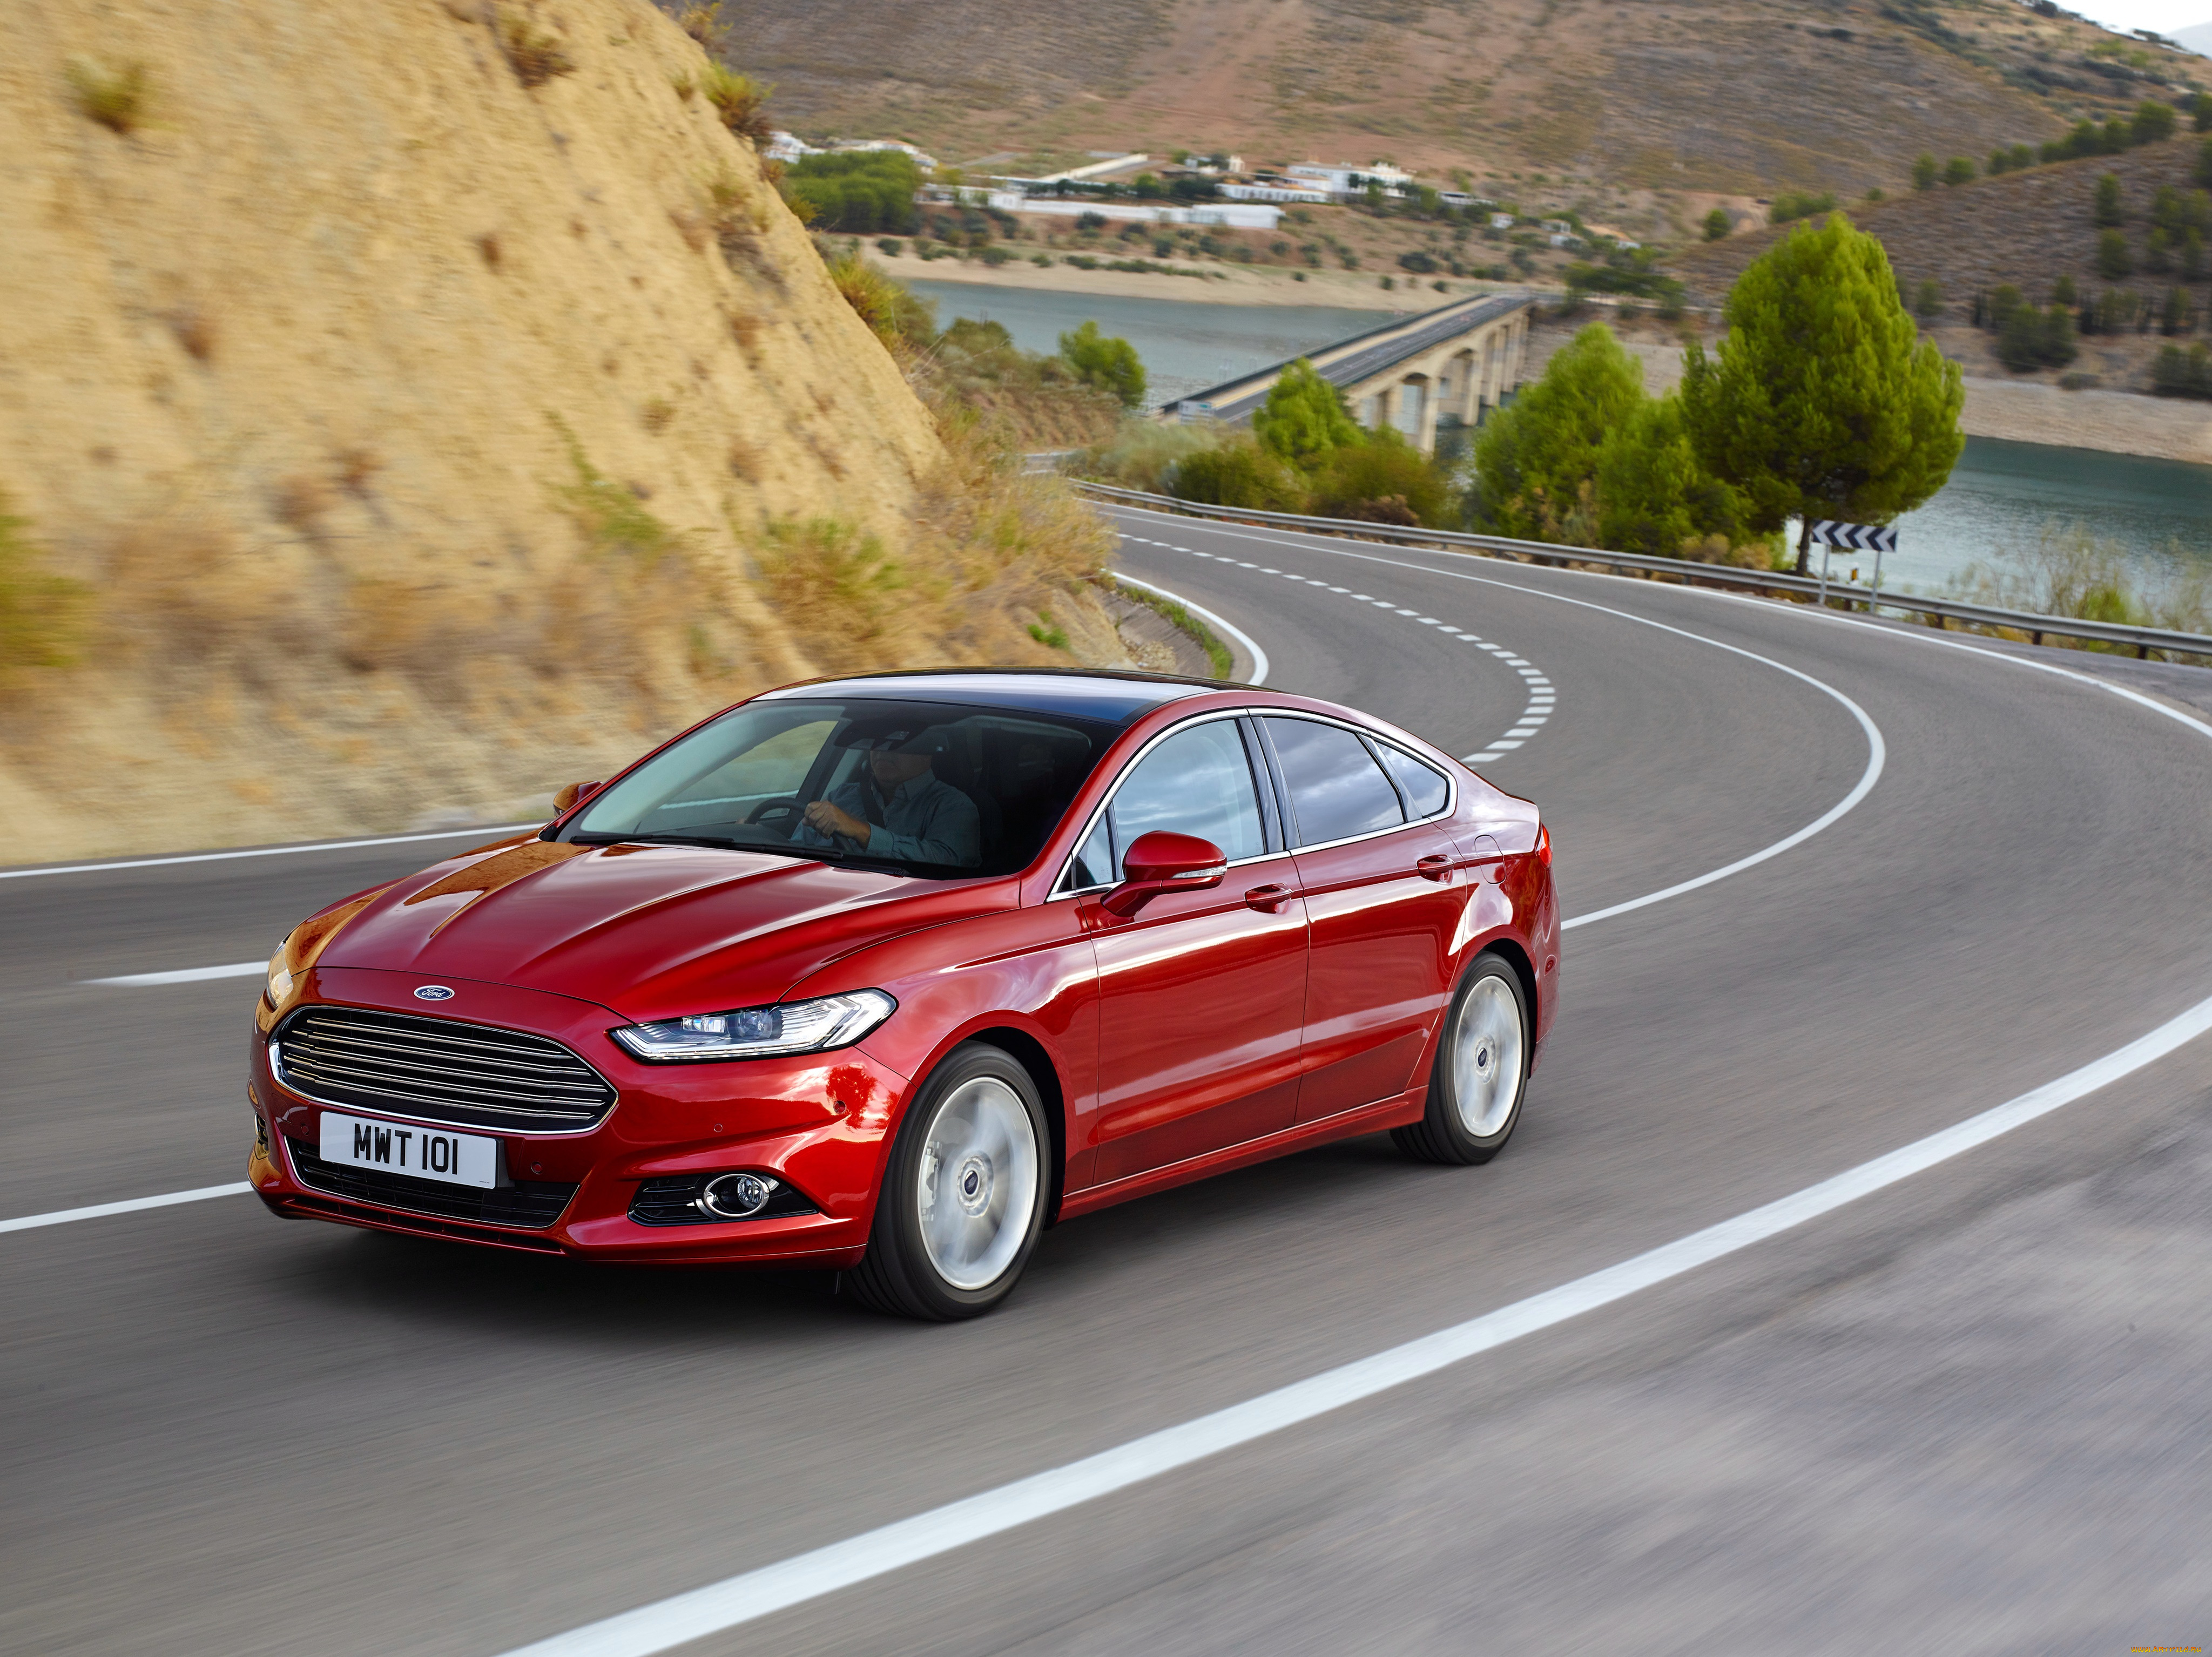 Машина 2015 года выпуска. Ford Mondeo 2018. Ford Mondeo 2015. Форд Мондео 5. Ford Mondeo 5 RS.